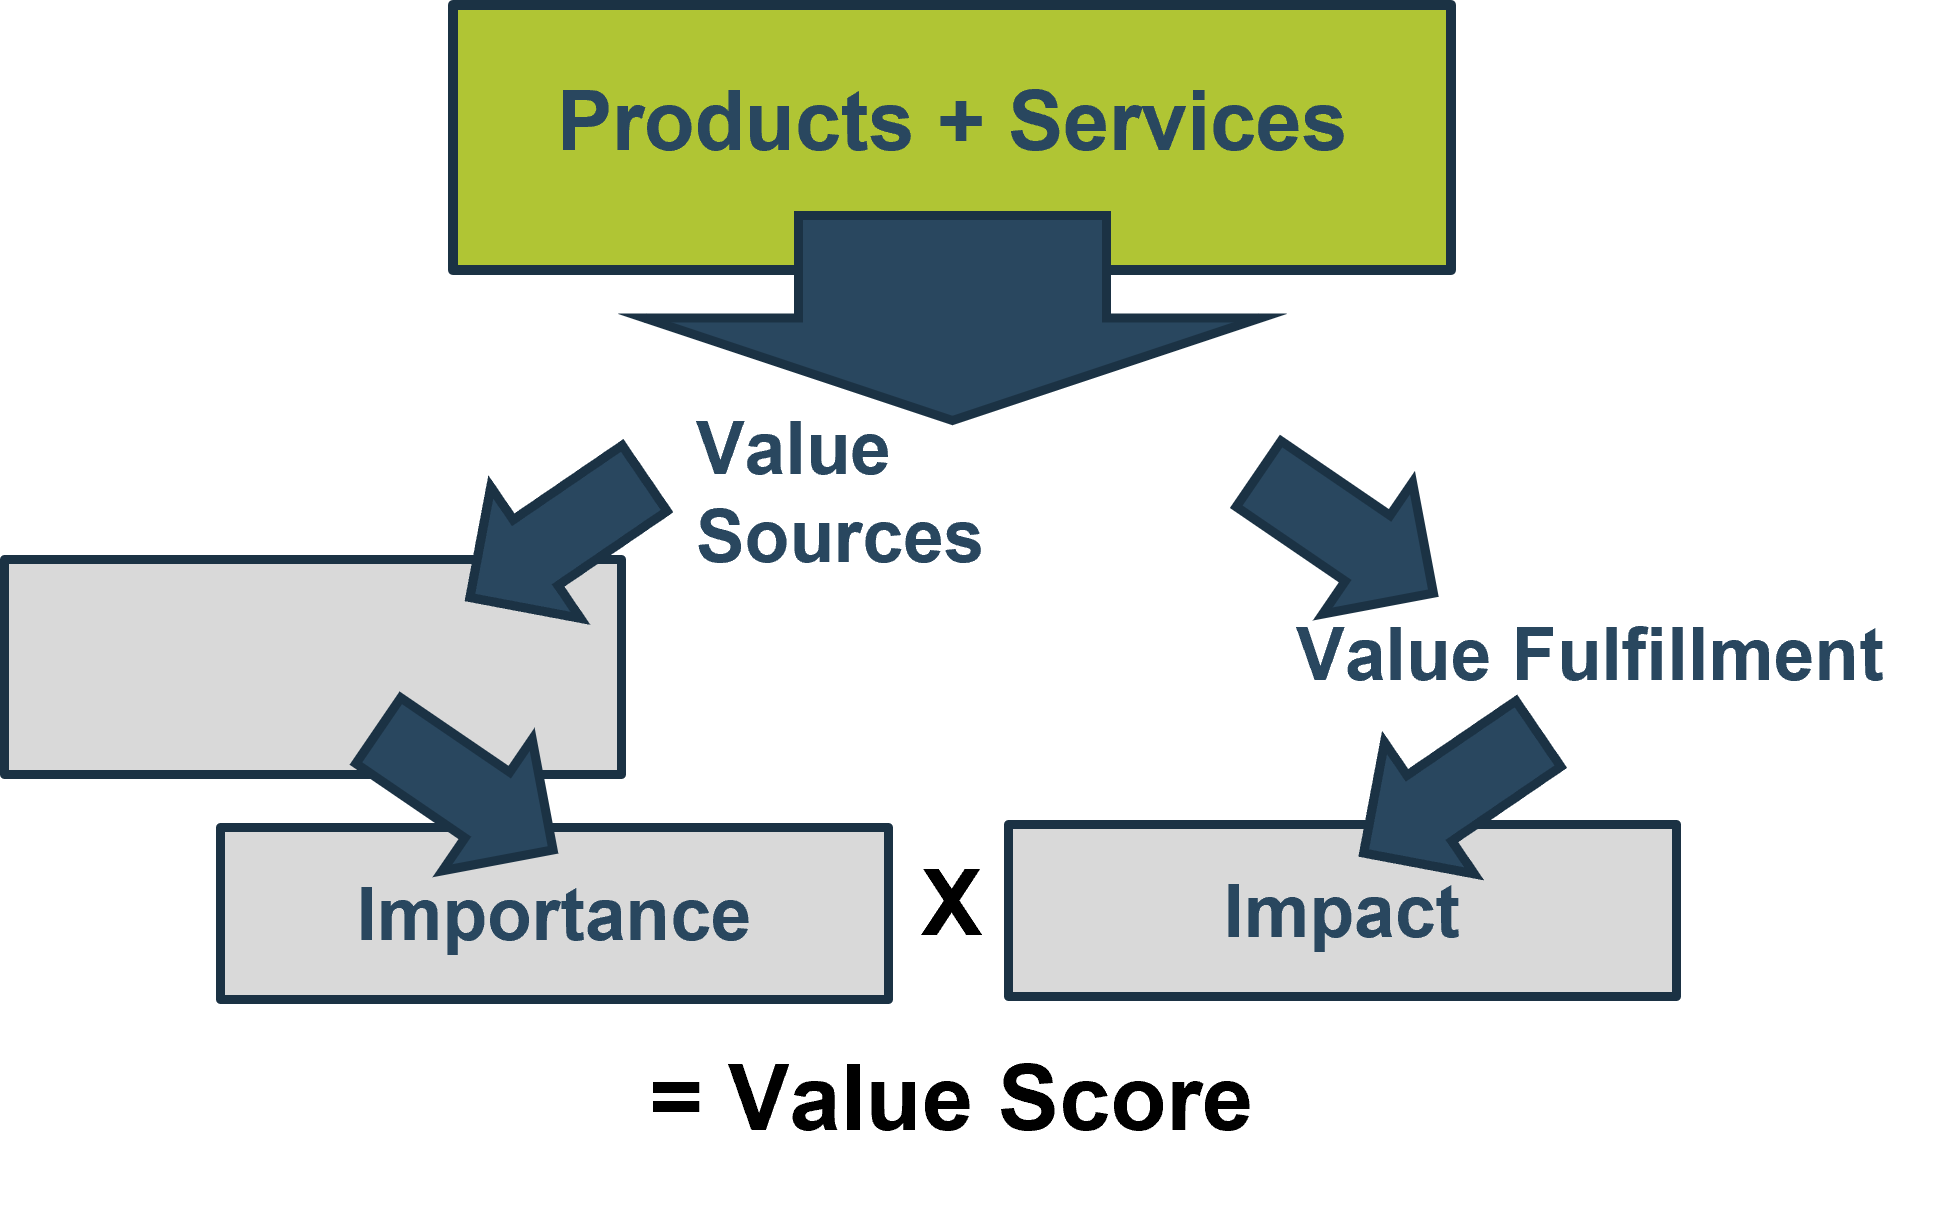 An image of the value measure framework is shown.